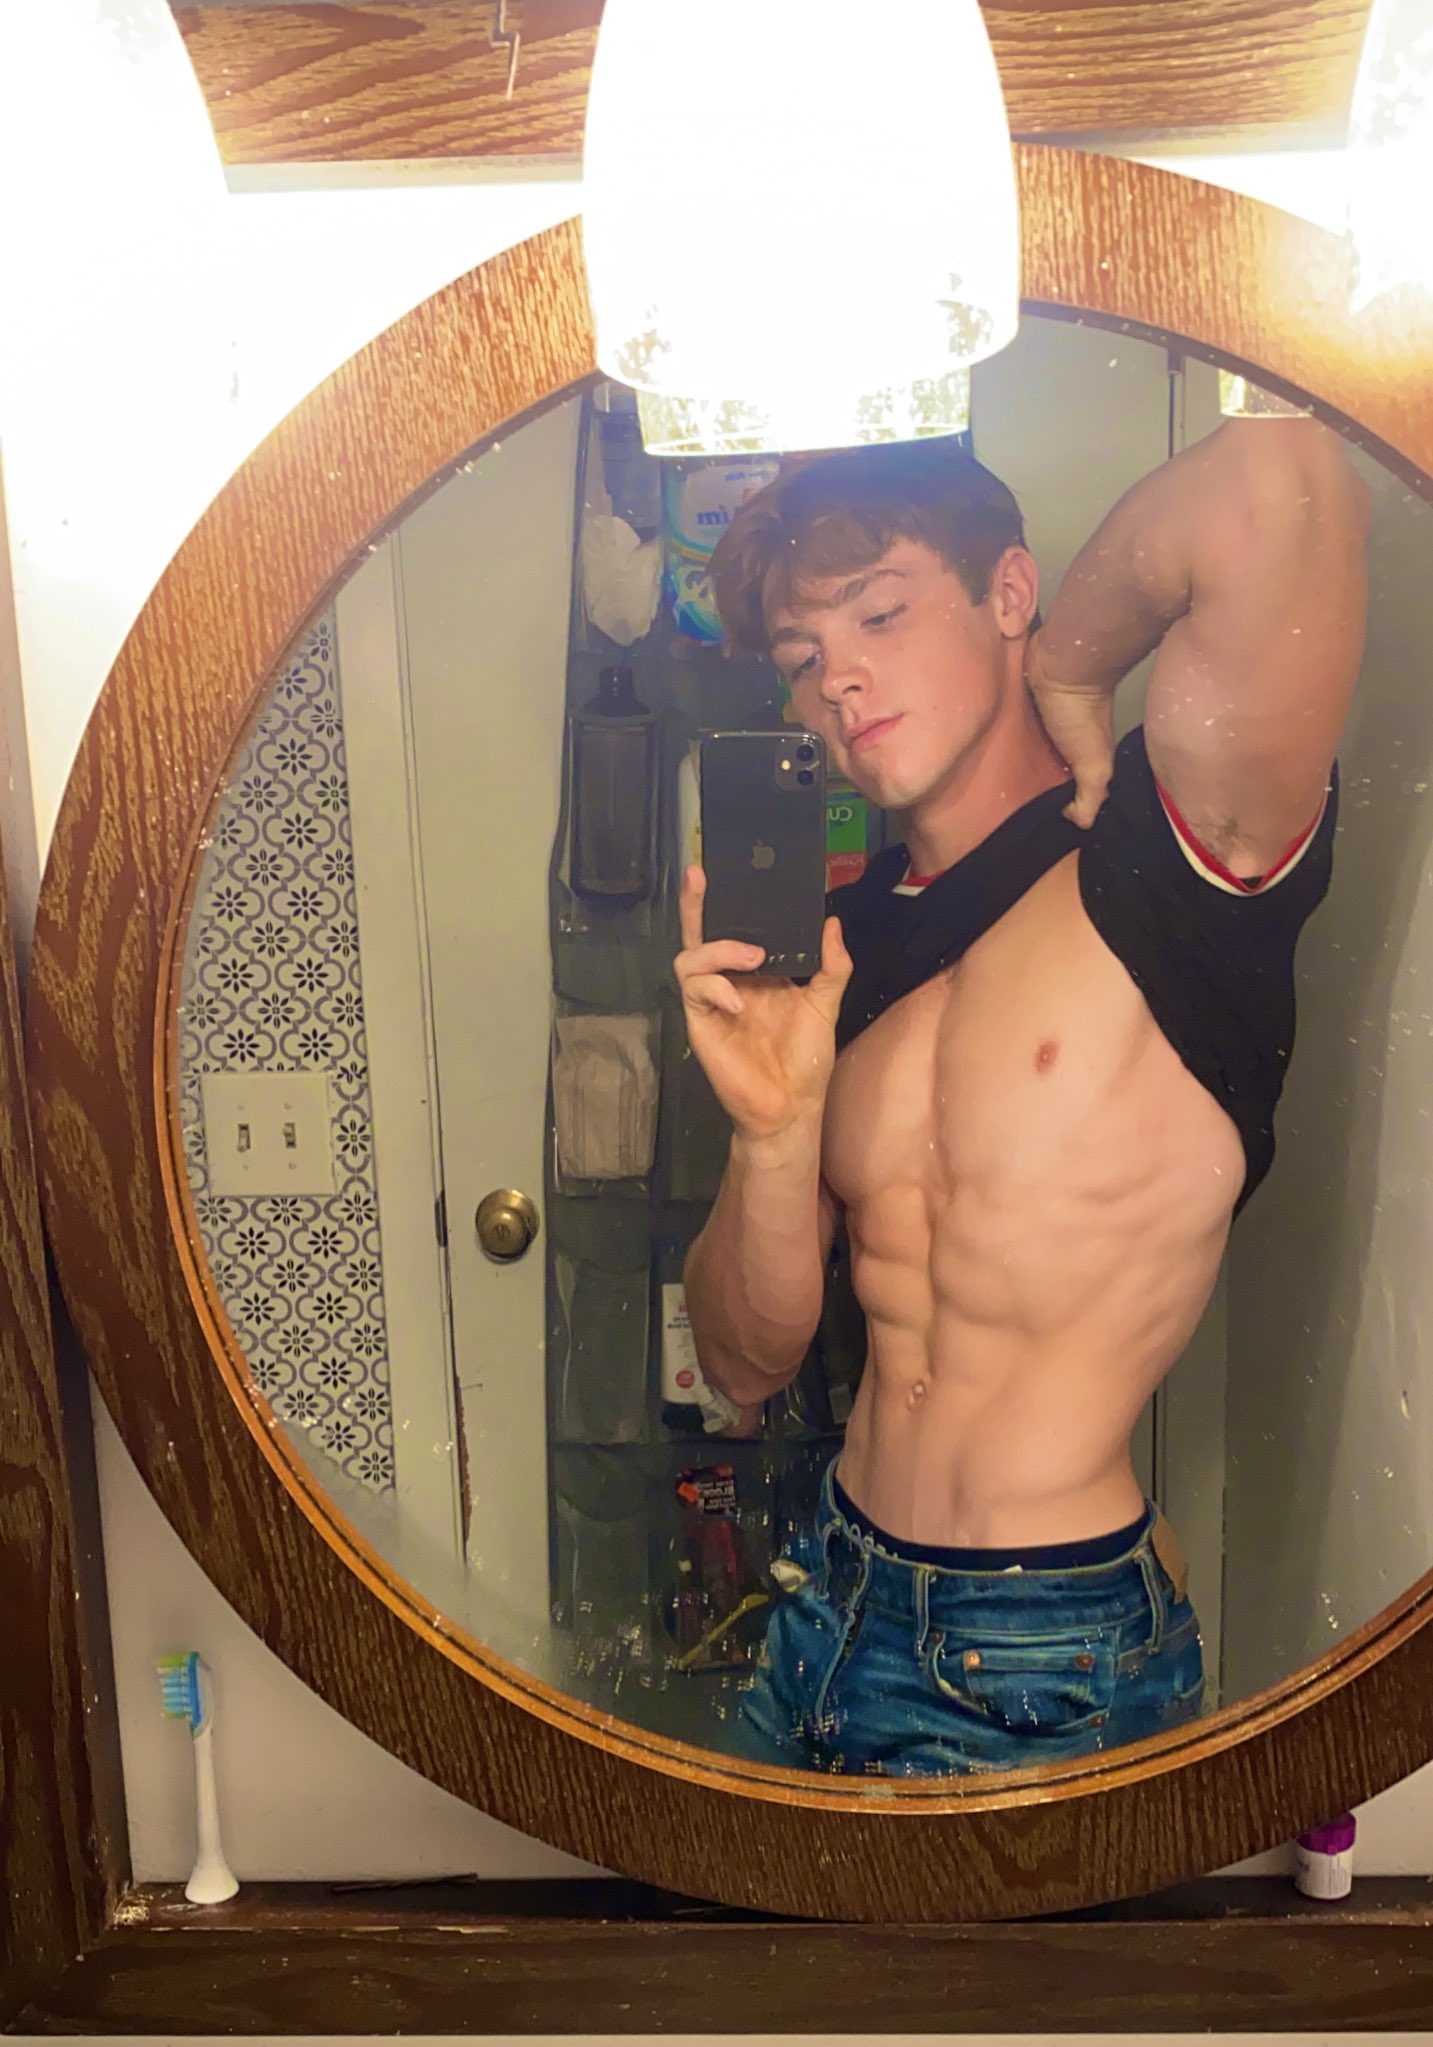 Diesel Godly - Dieselgodly OnlyFans Leaked